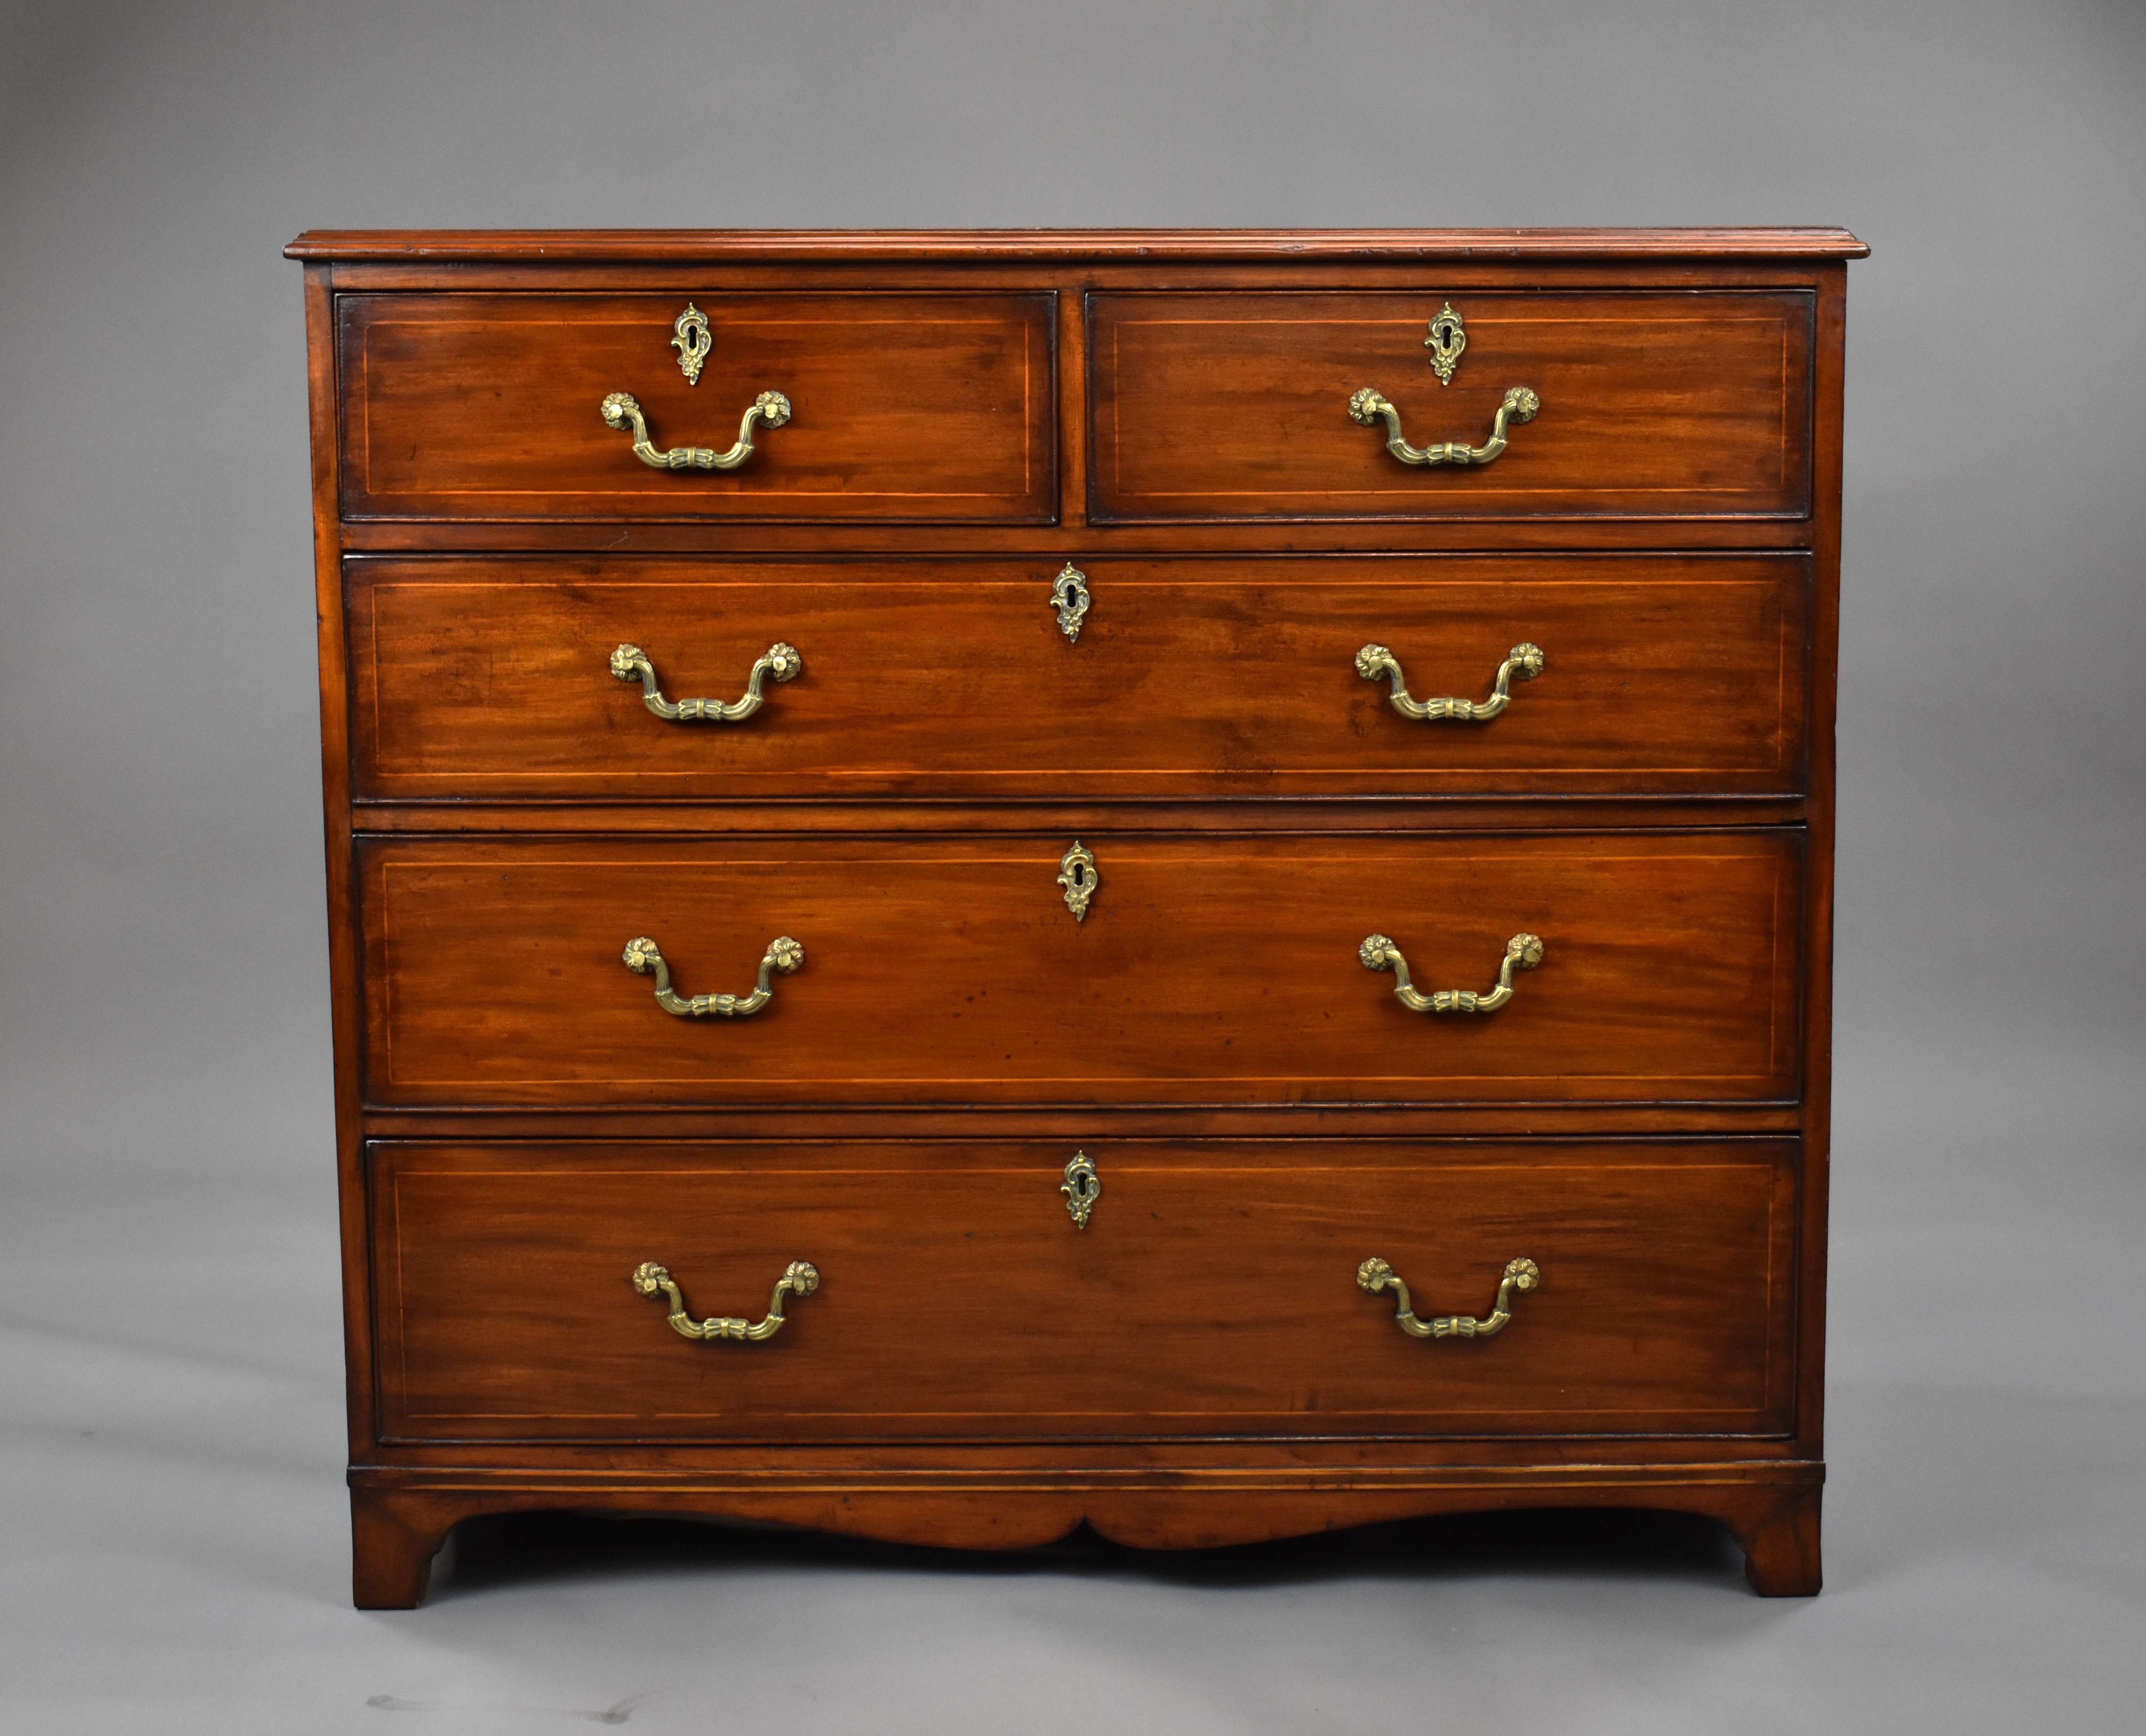 For sale is a good quality Edwardian mahogany chest of drawers having an arrangement of two short drawers over three long graduated drawers, each with ornate handles. The chest remains in good condition for its age showing minor signs of use and